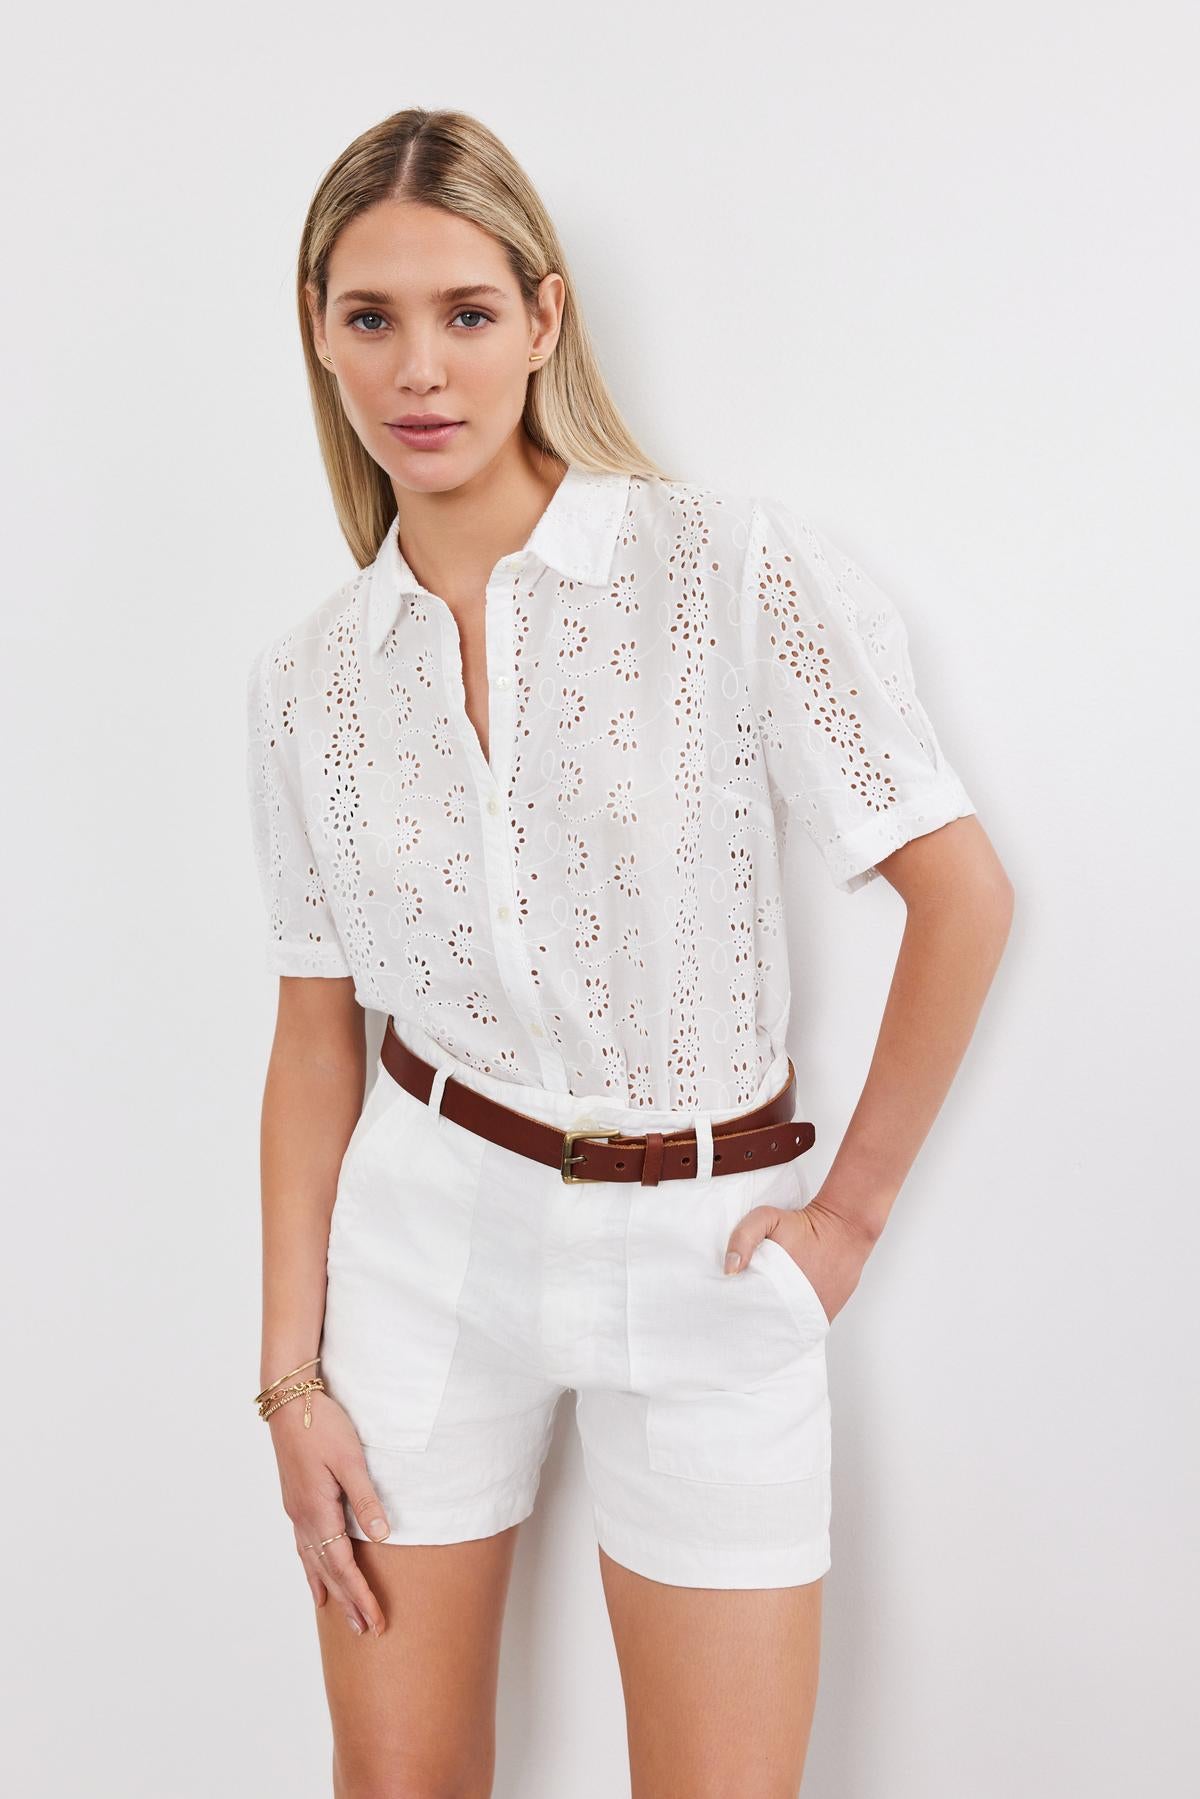 Young woman in a white cotton Olivia blouse with eyelet details and matching shorts with a brown belt, posing against a plain background. (Brand name: Velvet by Graham & Spencer)-36918784819393